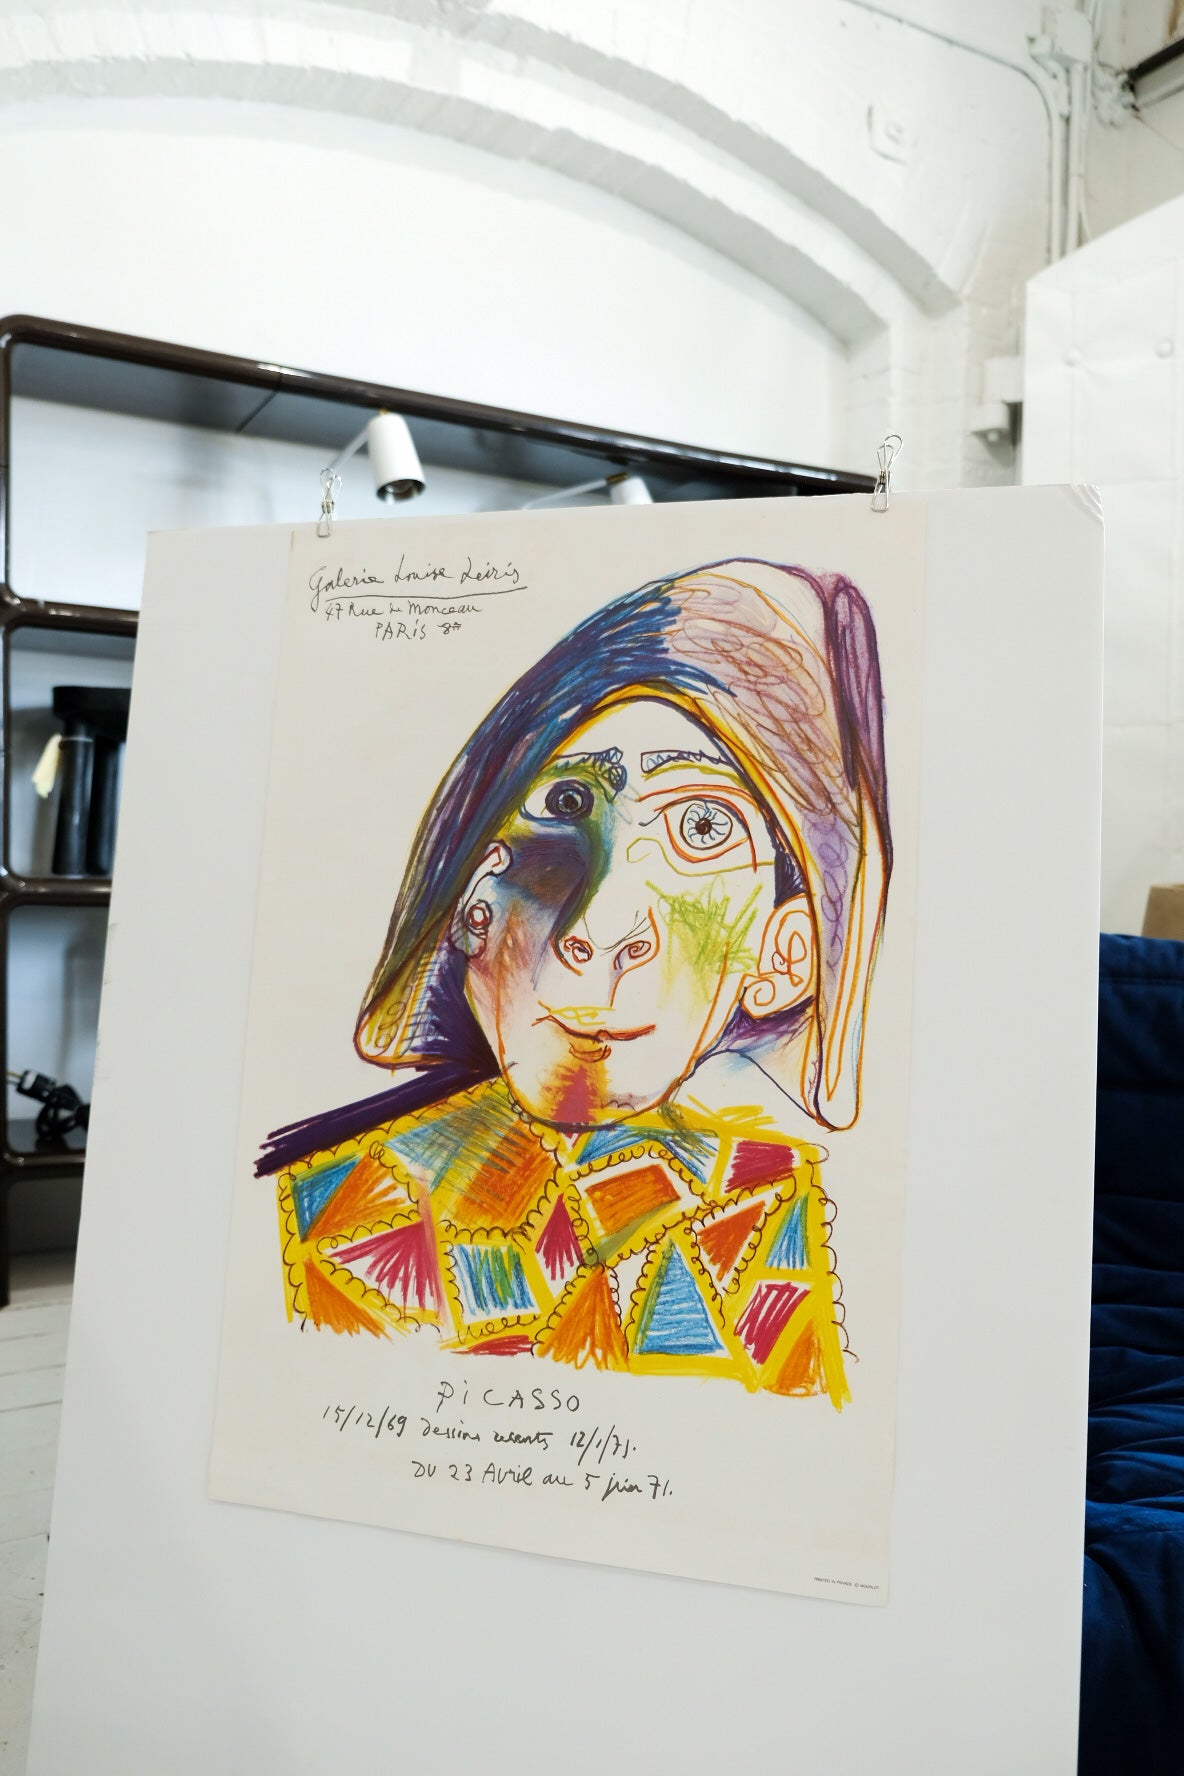 Harlequin, Galerie Louise Leiris by Pablo Picasso, 1971